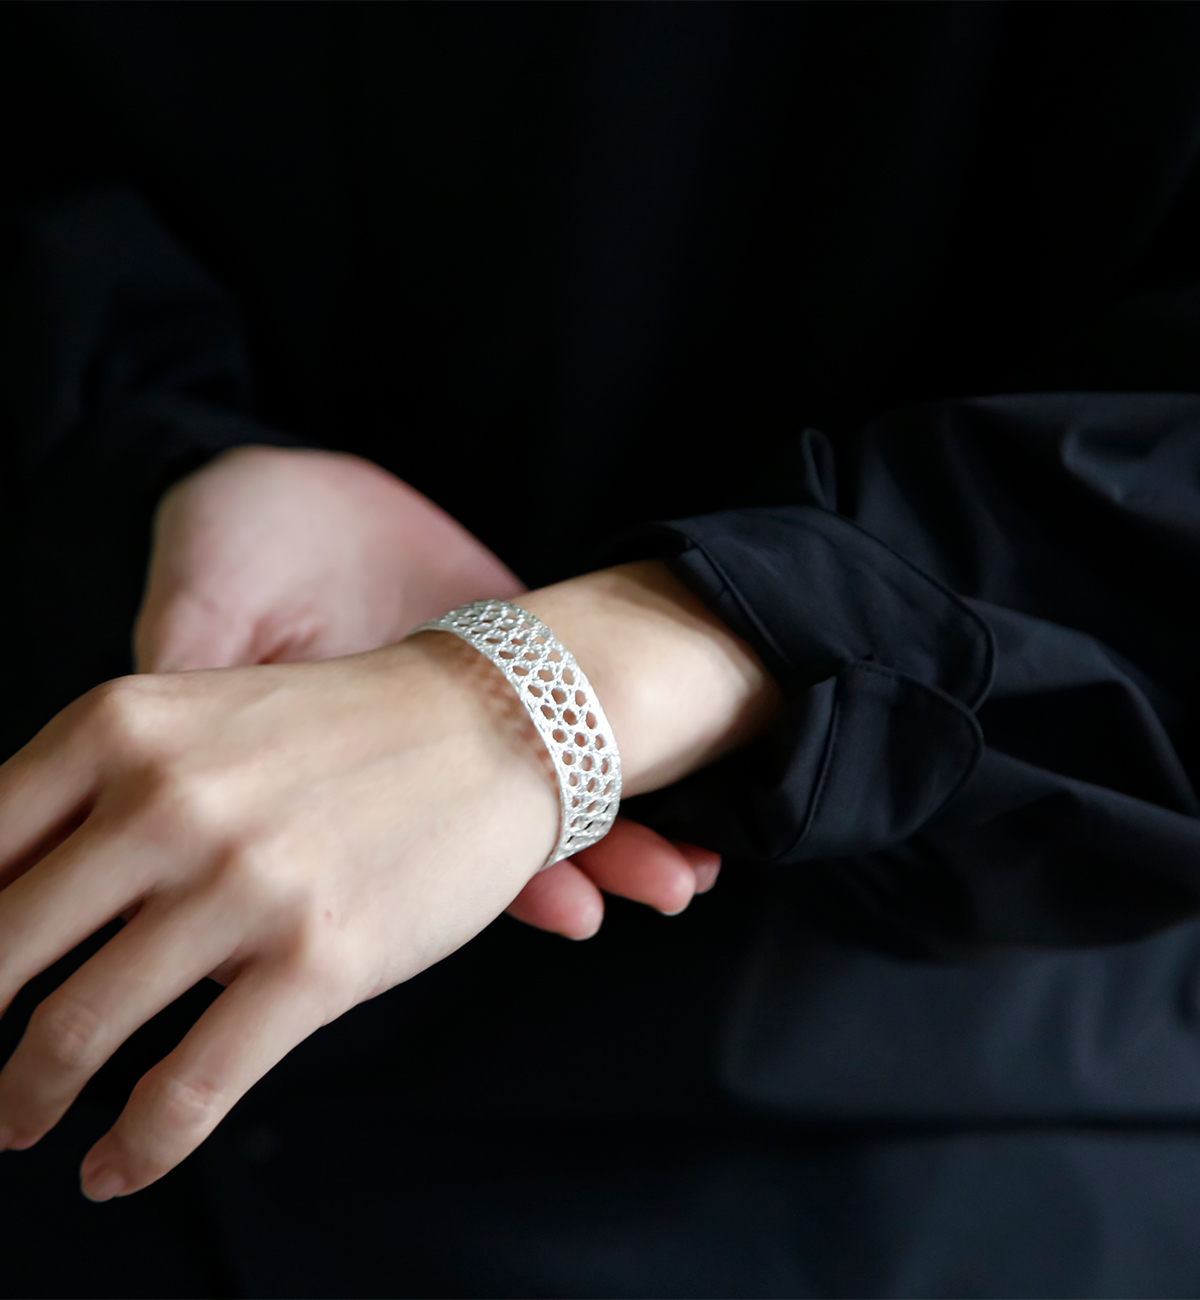 MAISON RUBUS.(][oX)RNV Vo[ [X oO L grecollection lace bangle Lh re-002